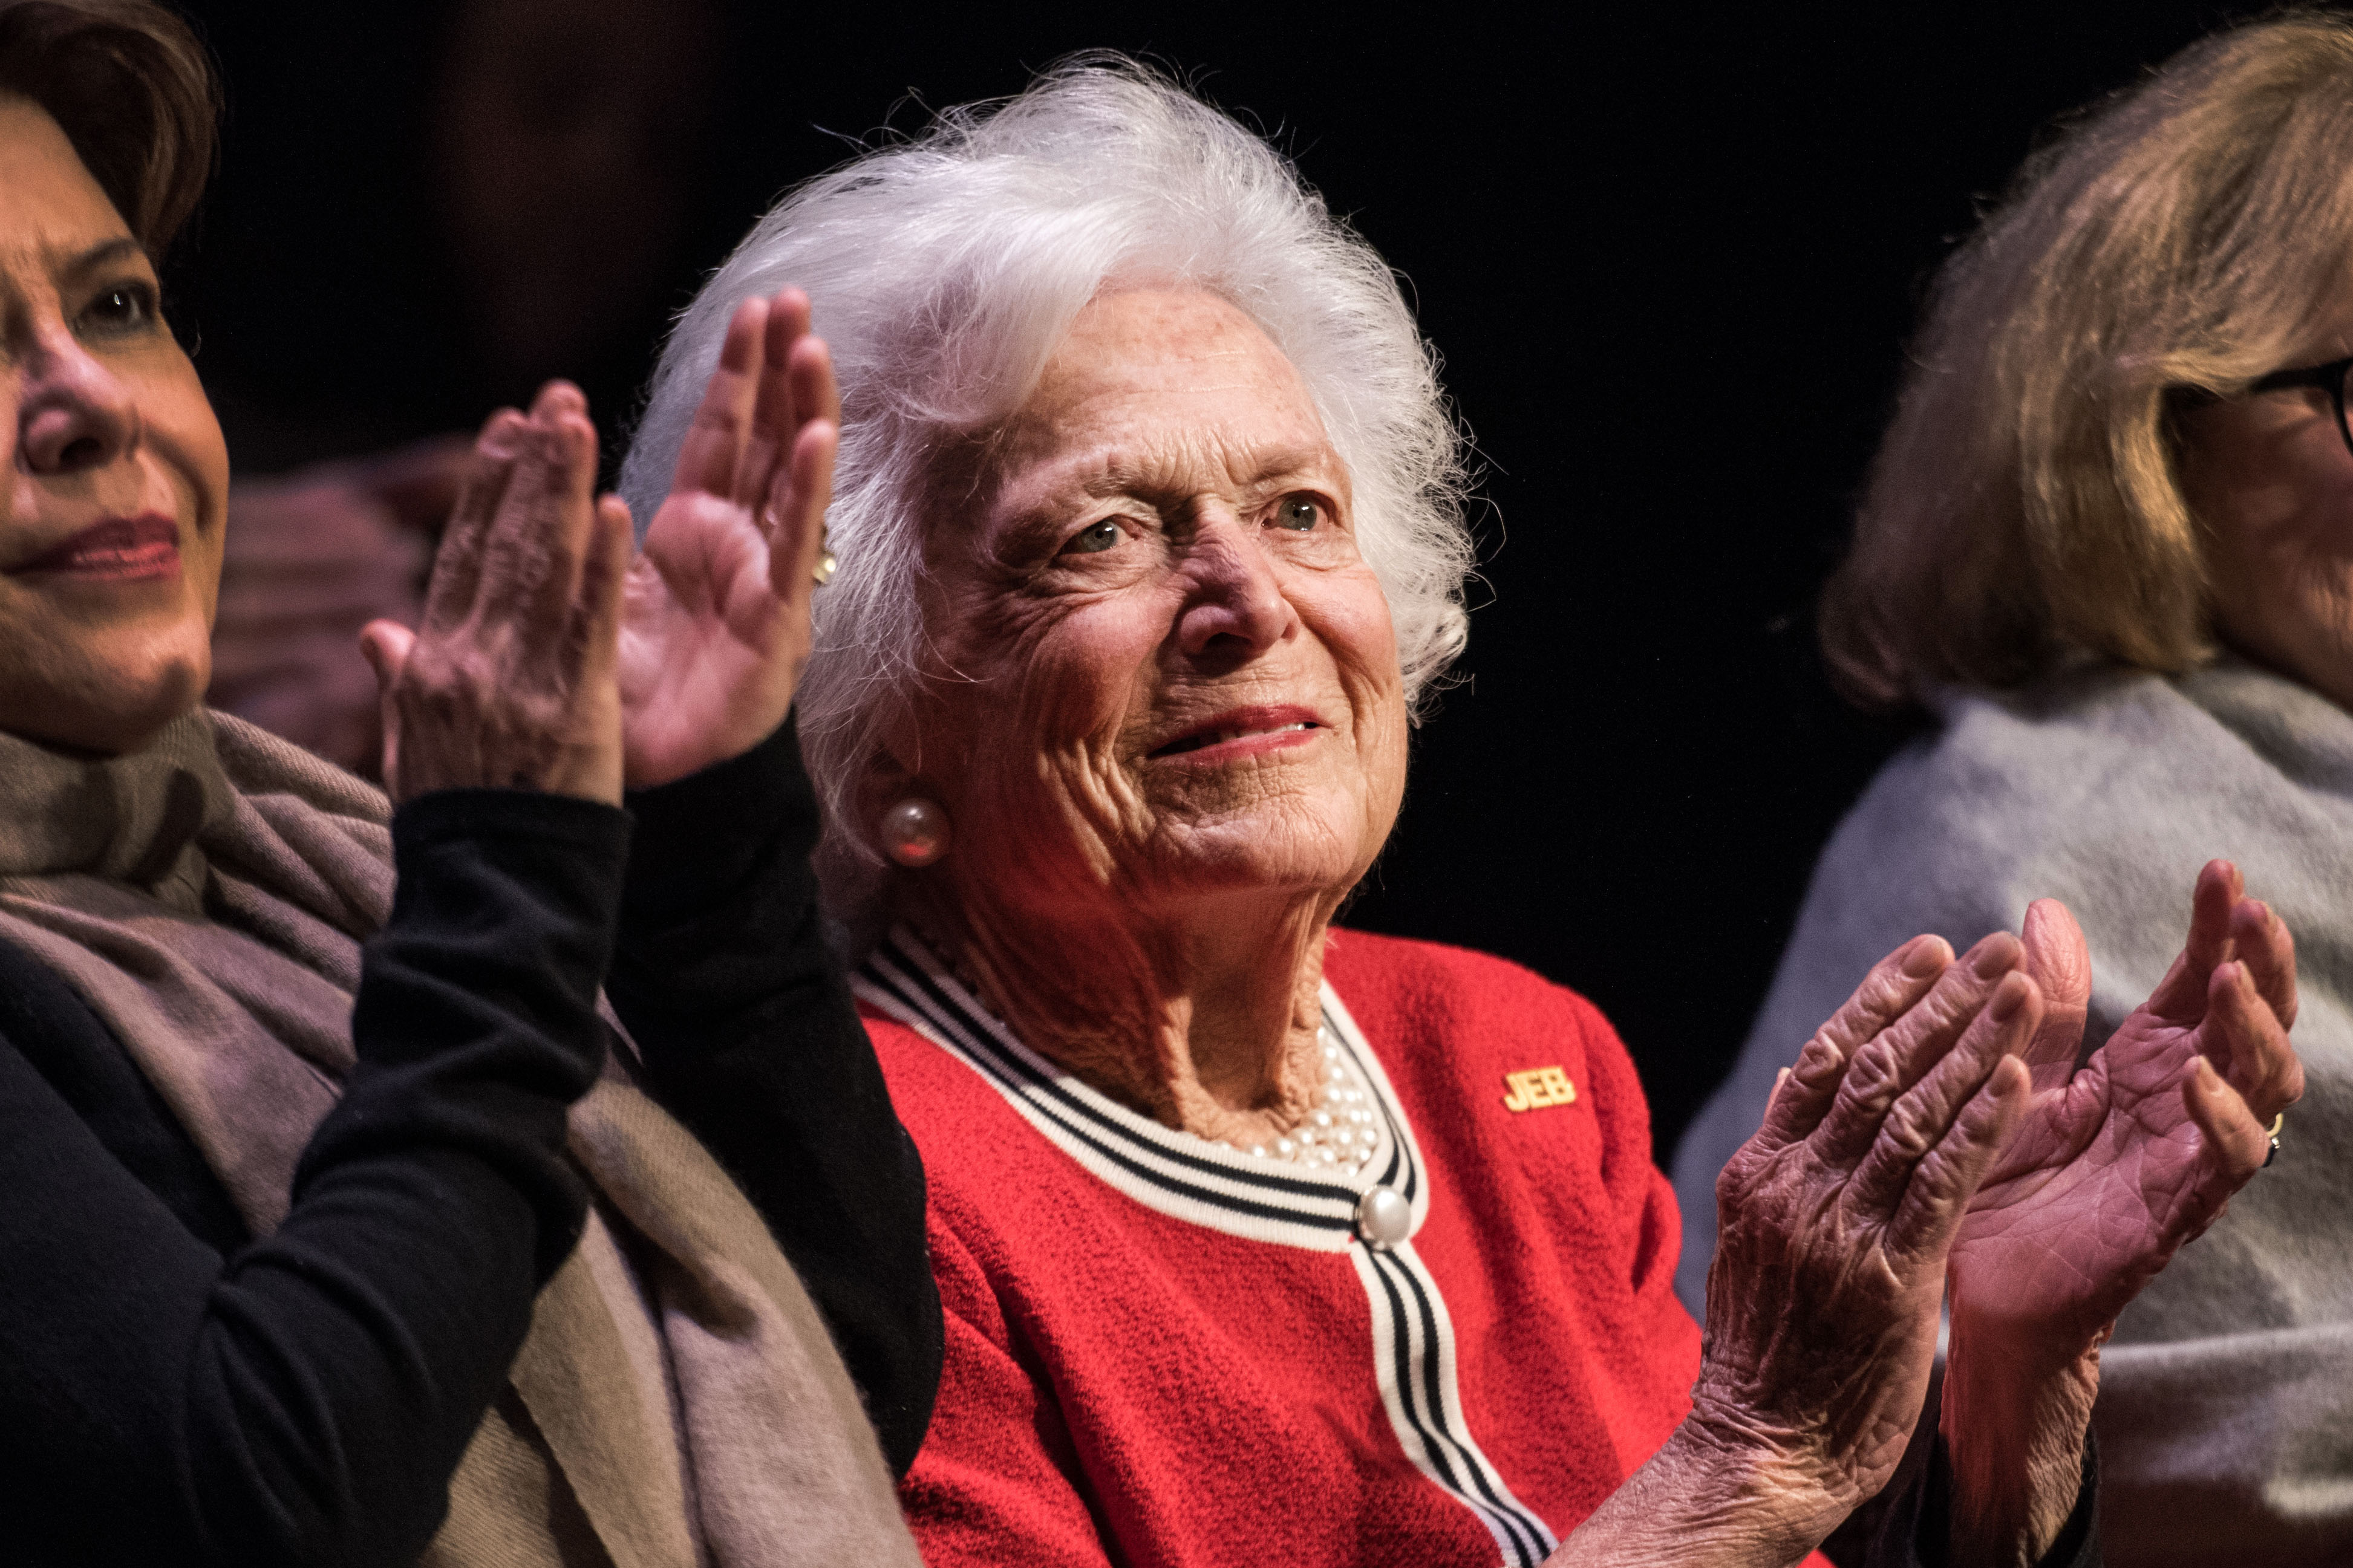 Former first lady Mrs. Barbara Bush applauds for Republican presidential candidate Jeb Bush during a campaign event in Greenville, S.C. on Feb. 19, 2016. (Sean Rayford—Getty Images)